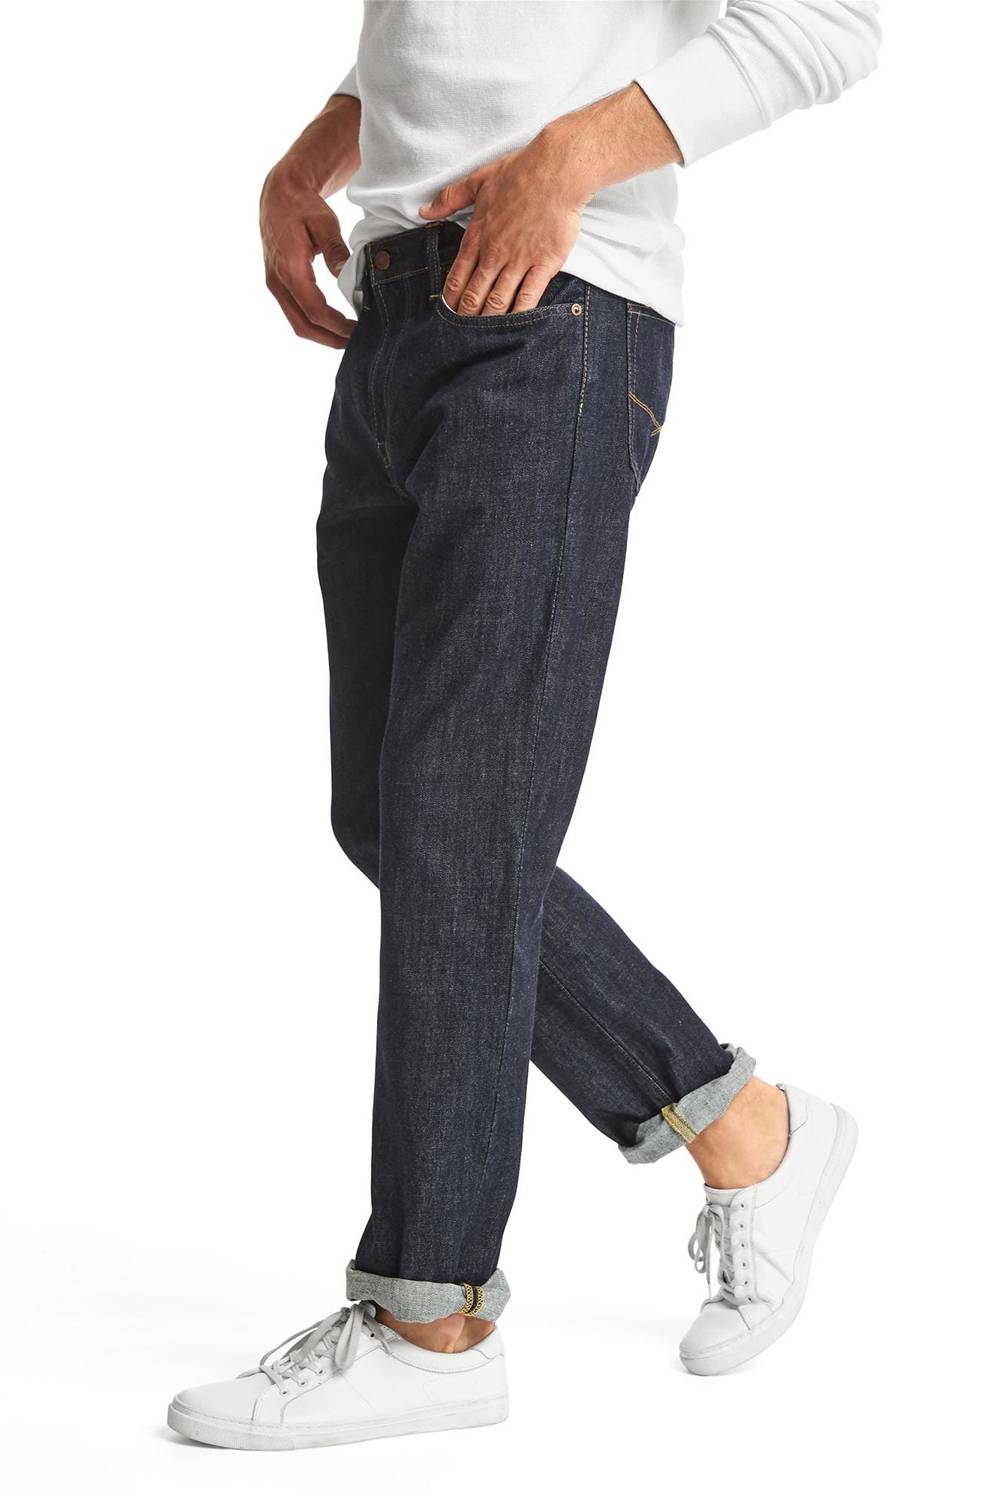 GAP - Jeans Straight Fit Hombre